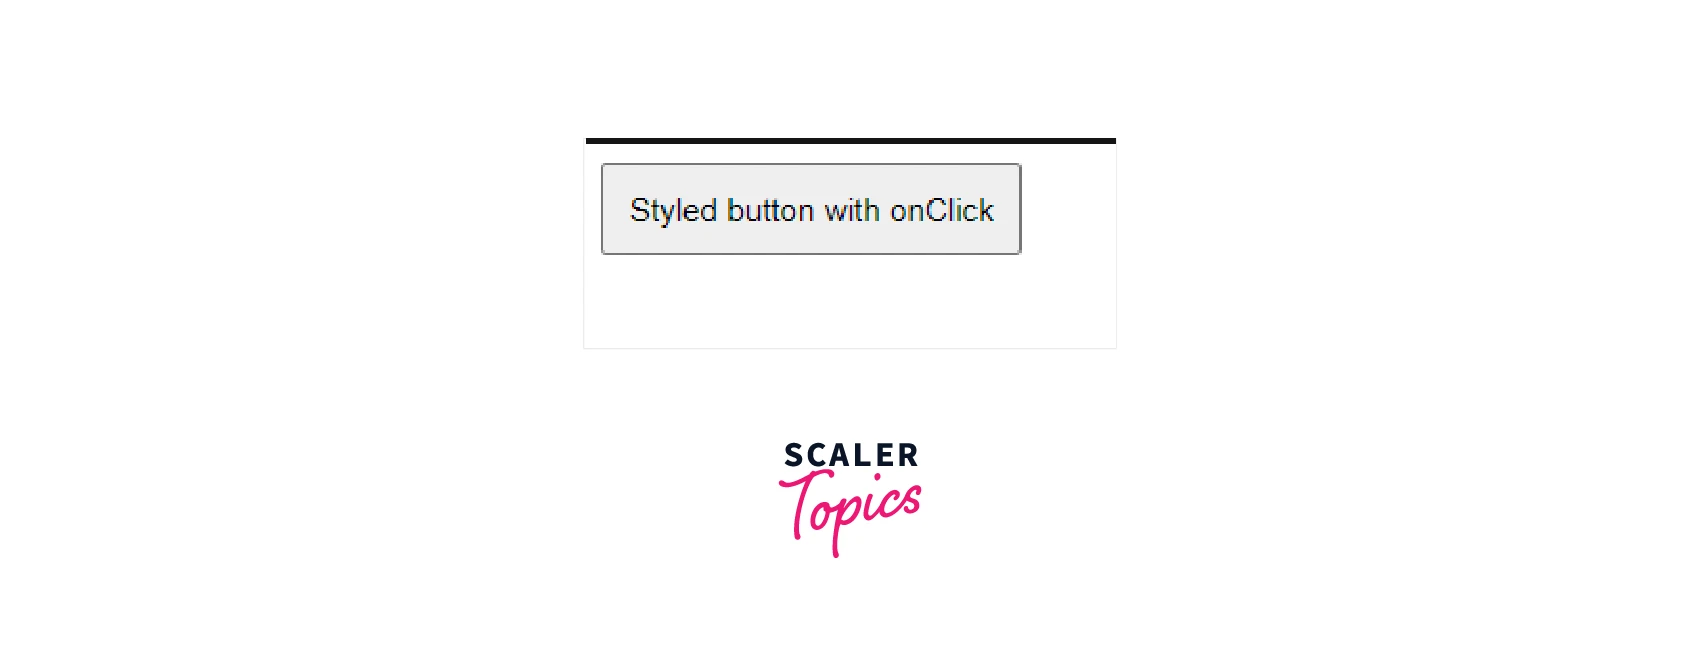 styled button with onclick